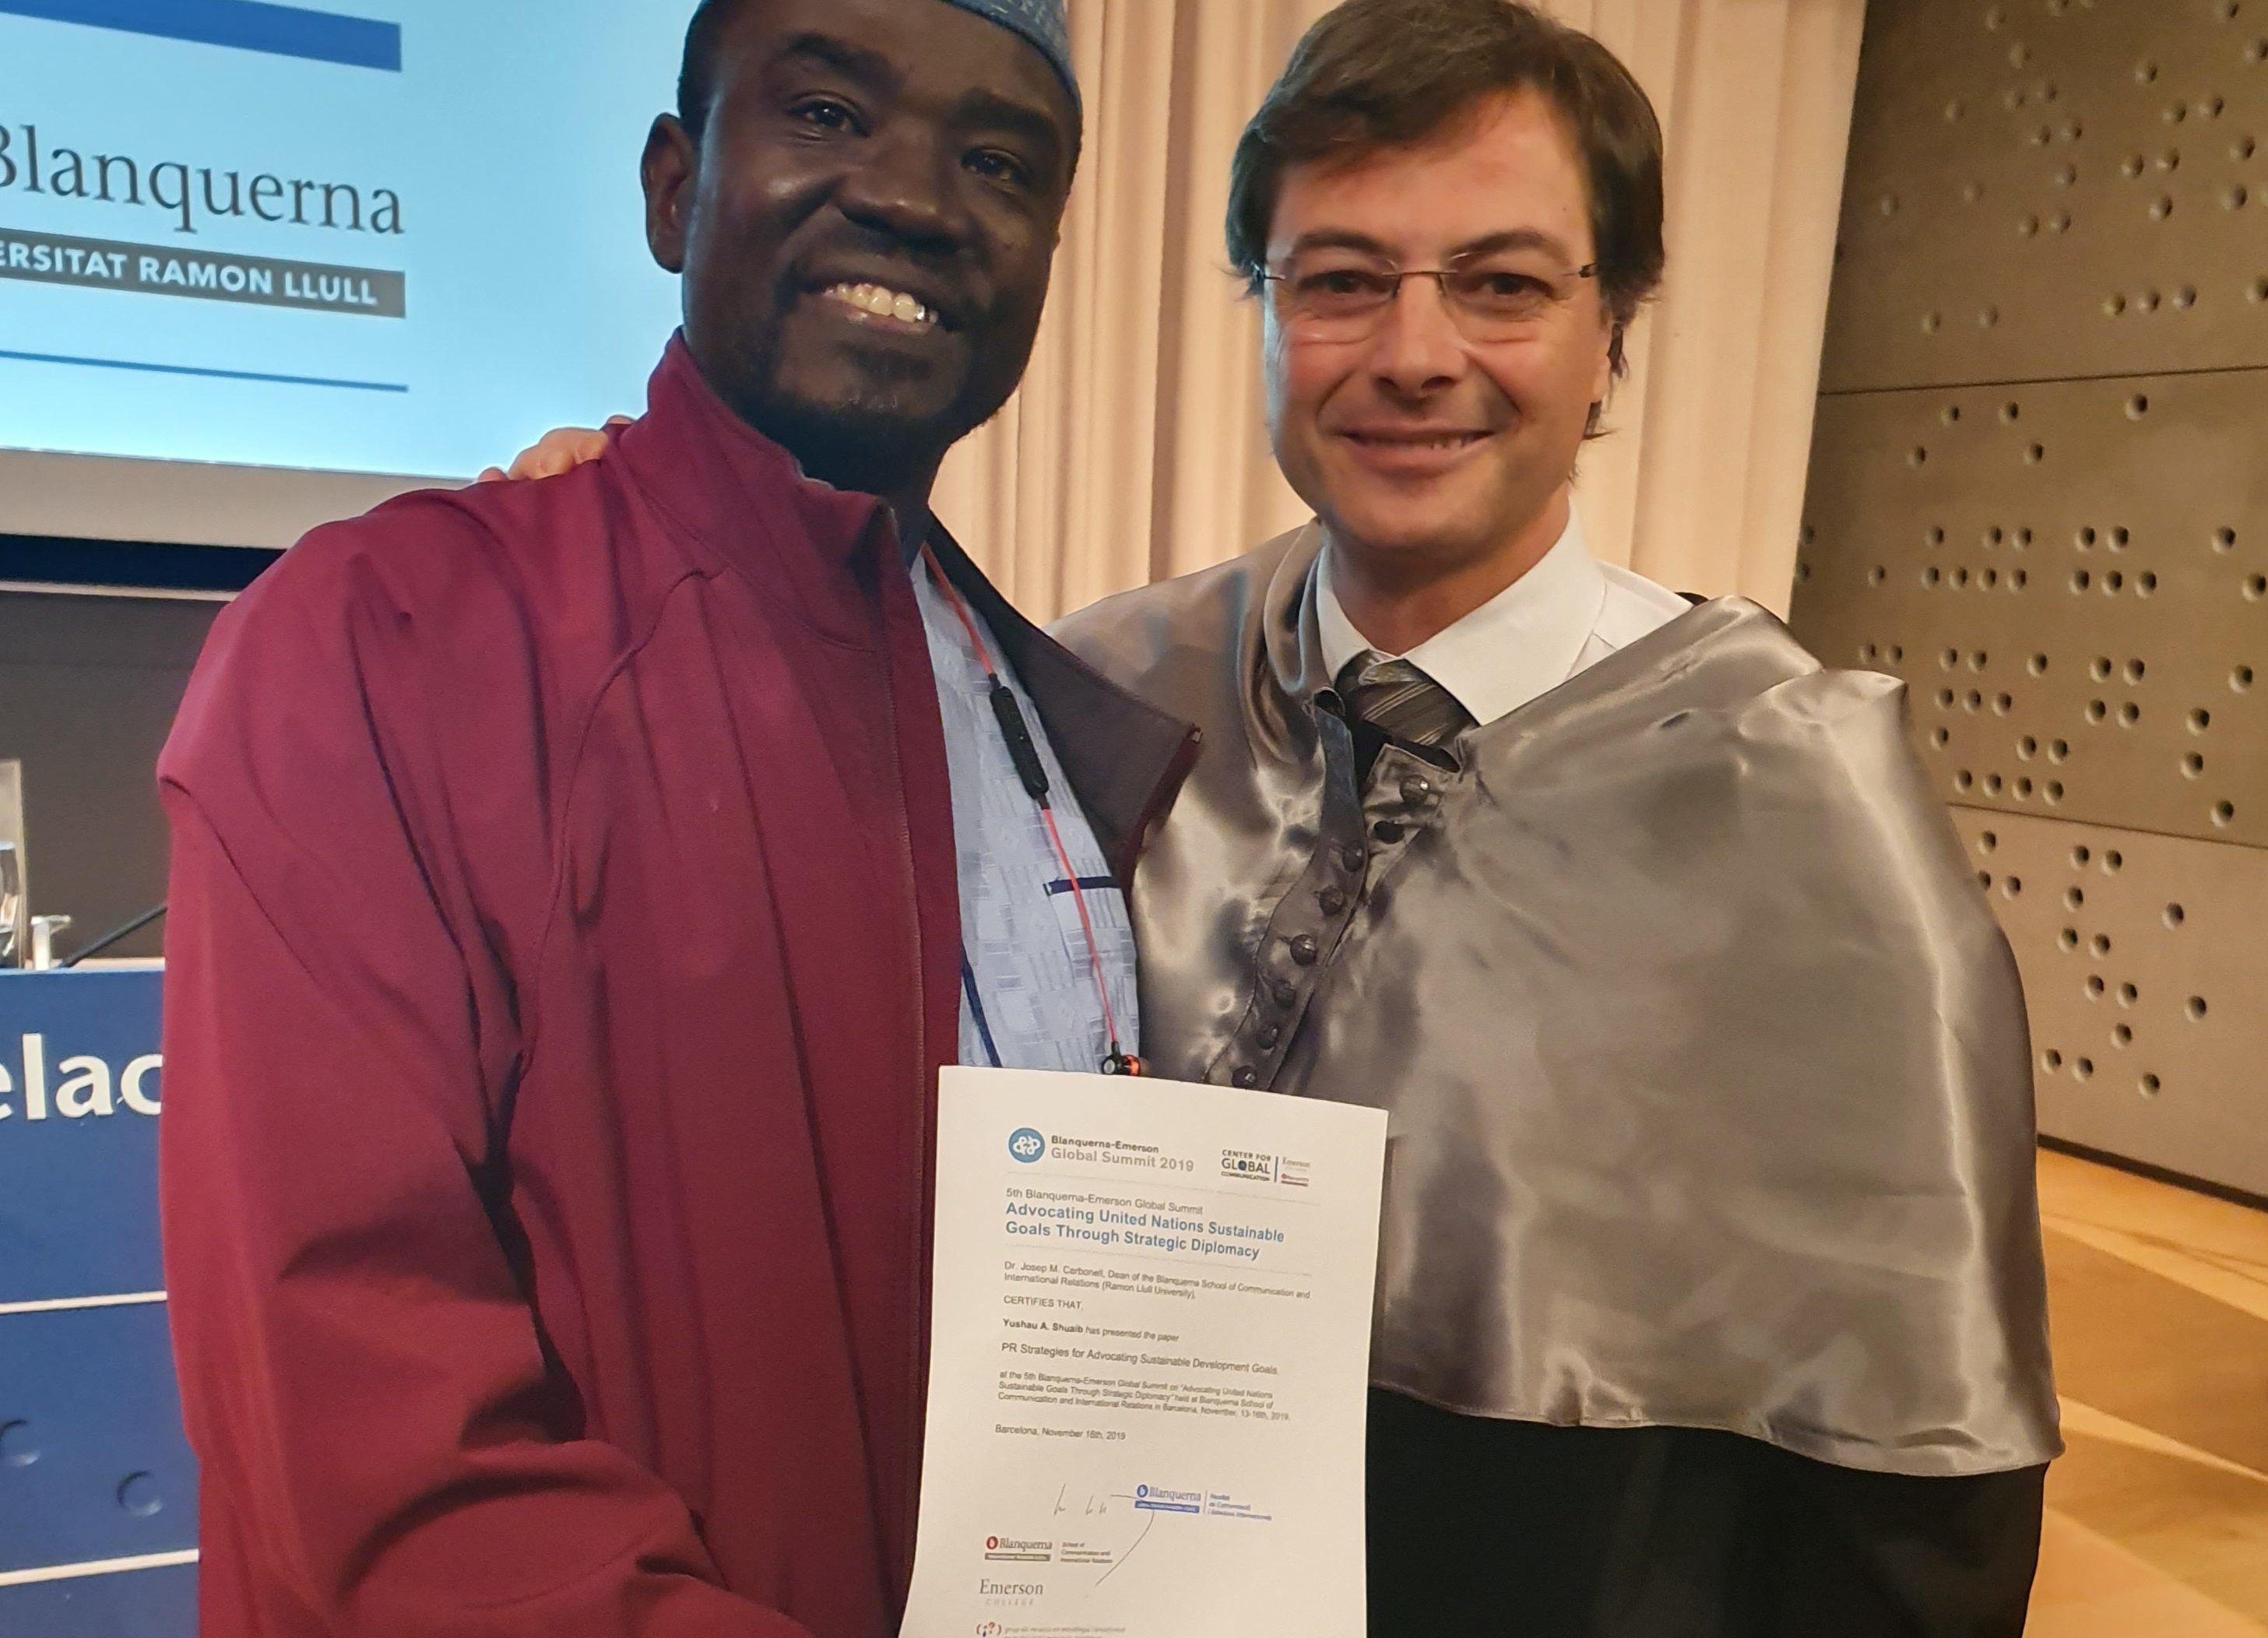 Yushau Shuaib with with Director of Blanquerna-Emerson Center for Global Communication Dr Enric Ordeix in Barcelona Summit